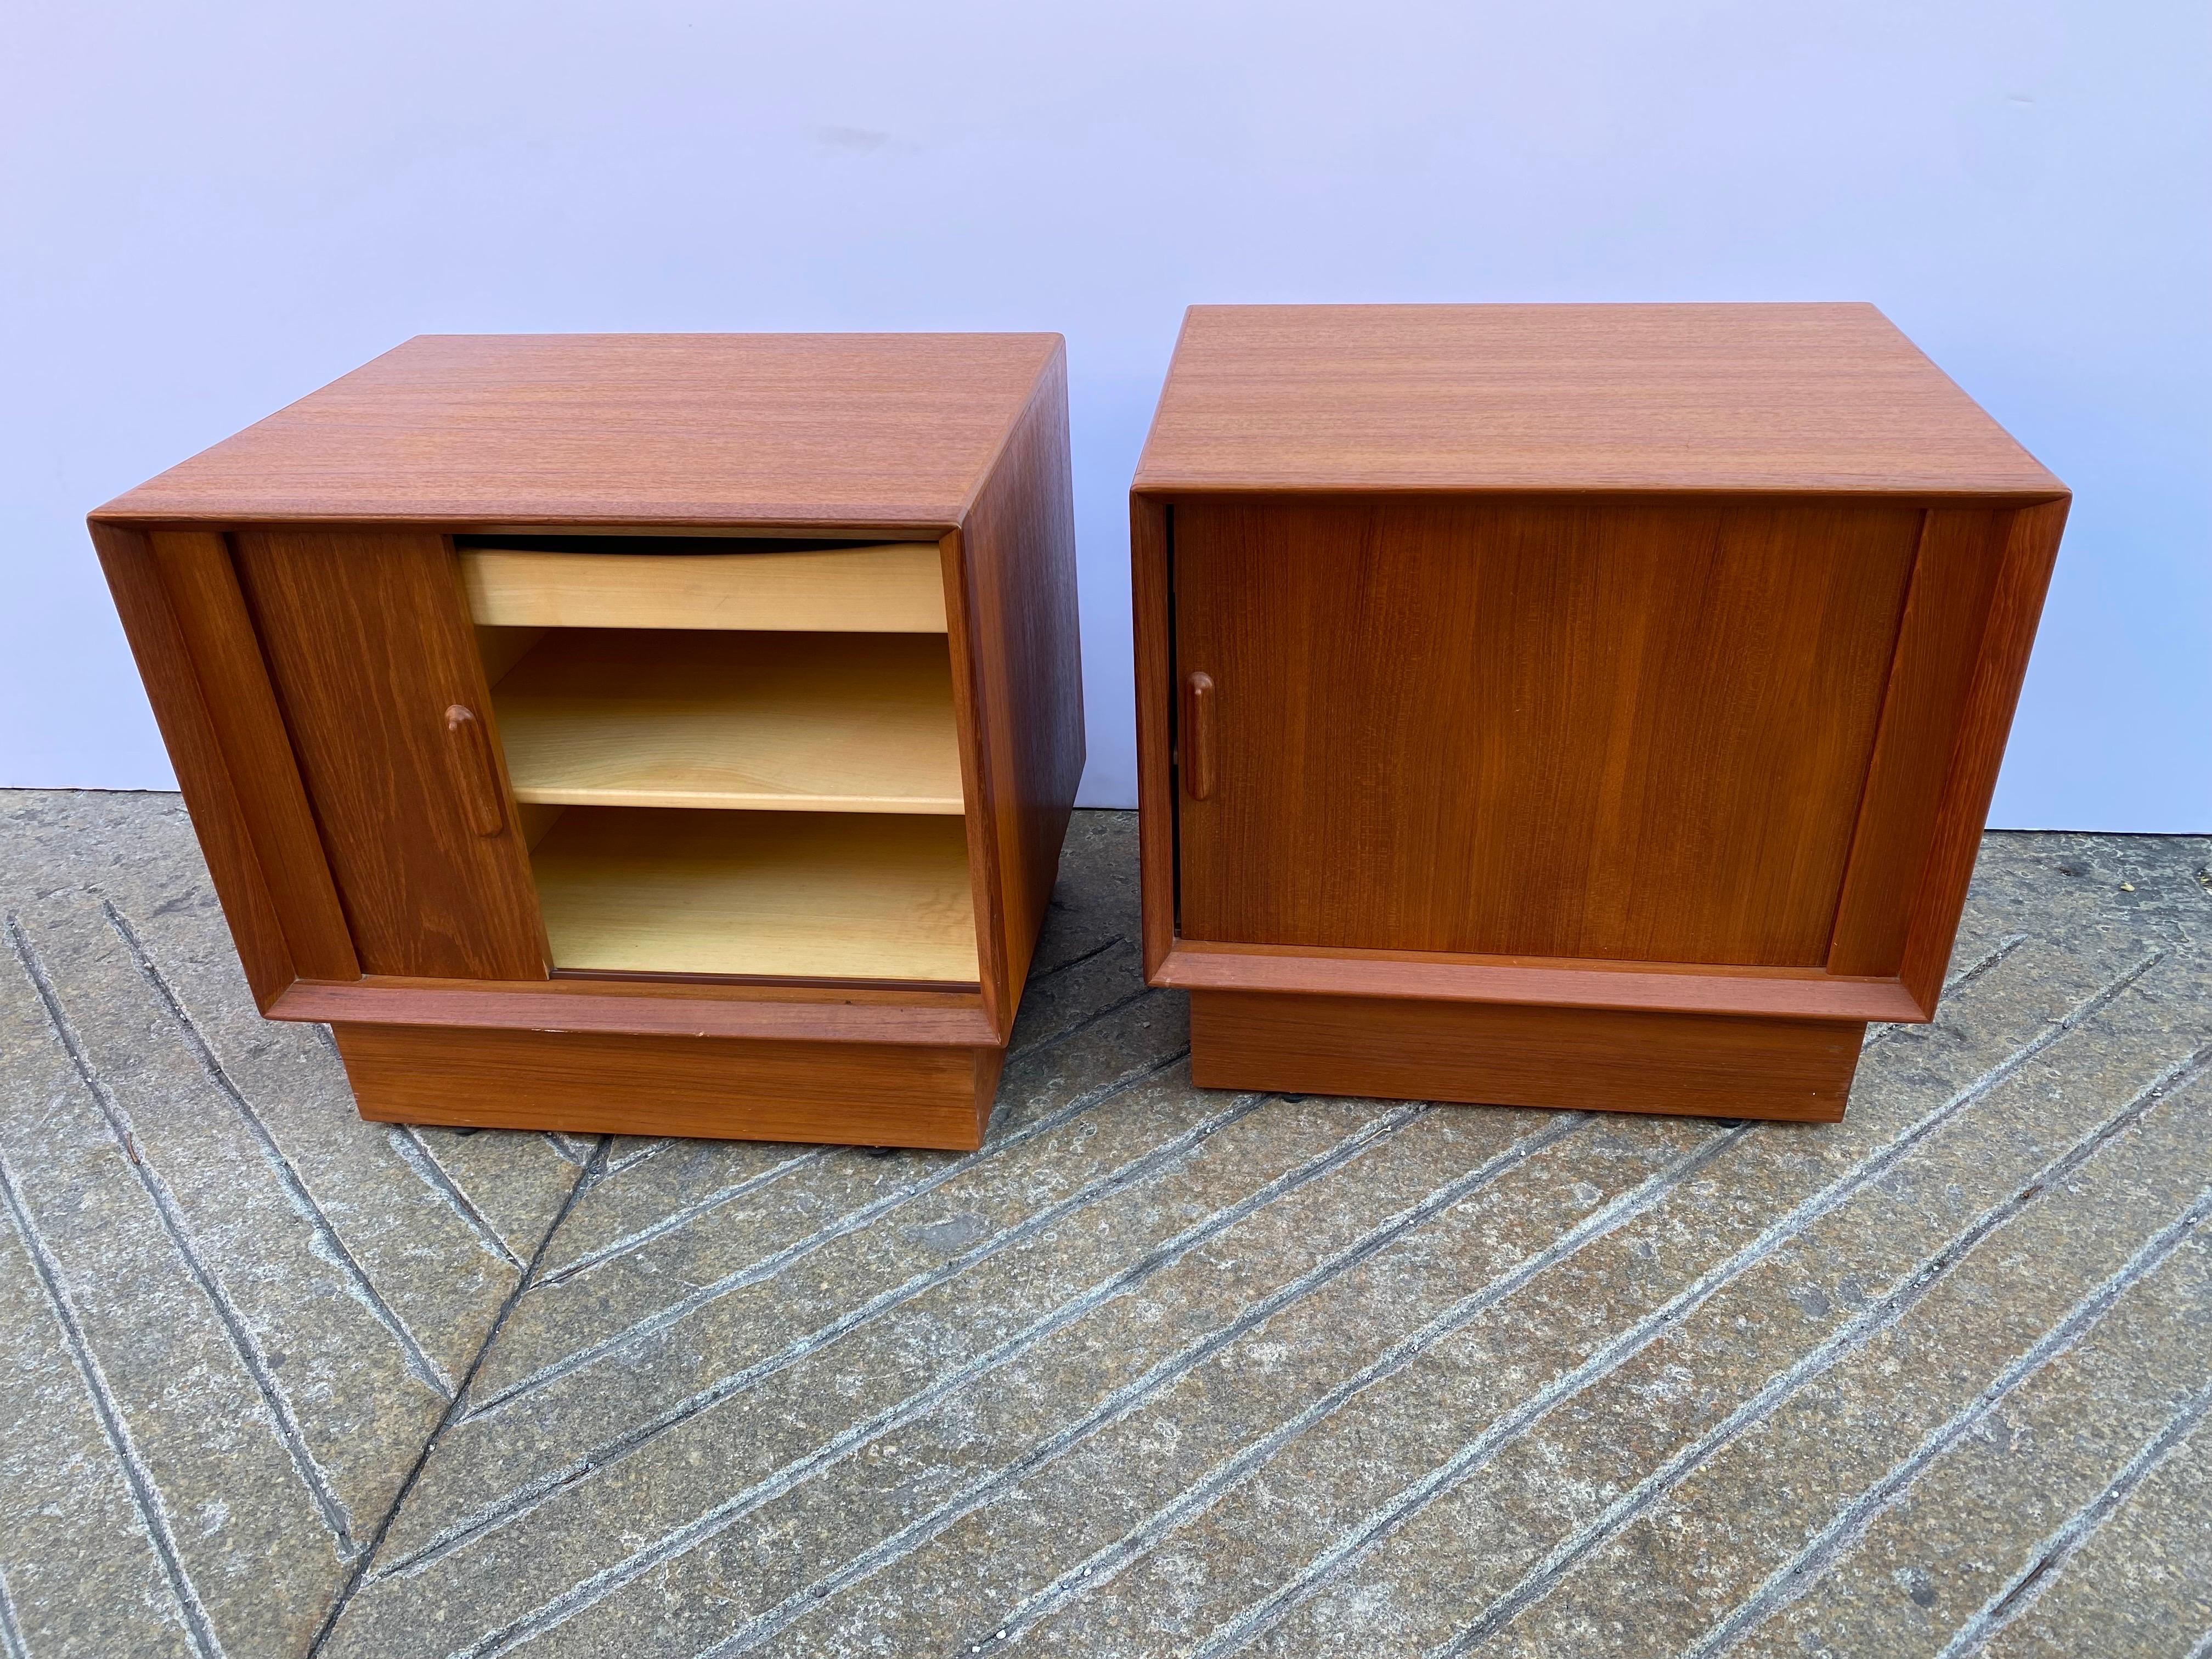 Nice pair of Falster teak Tambour door nightstands with Birch pull out drawer and interior. Very nice shape, tops refinished, all cleaned and oiled. Label inside one cabinet. Nice scale and size! Measure 17.25 deep, 21.75 wide and 20